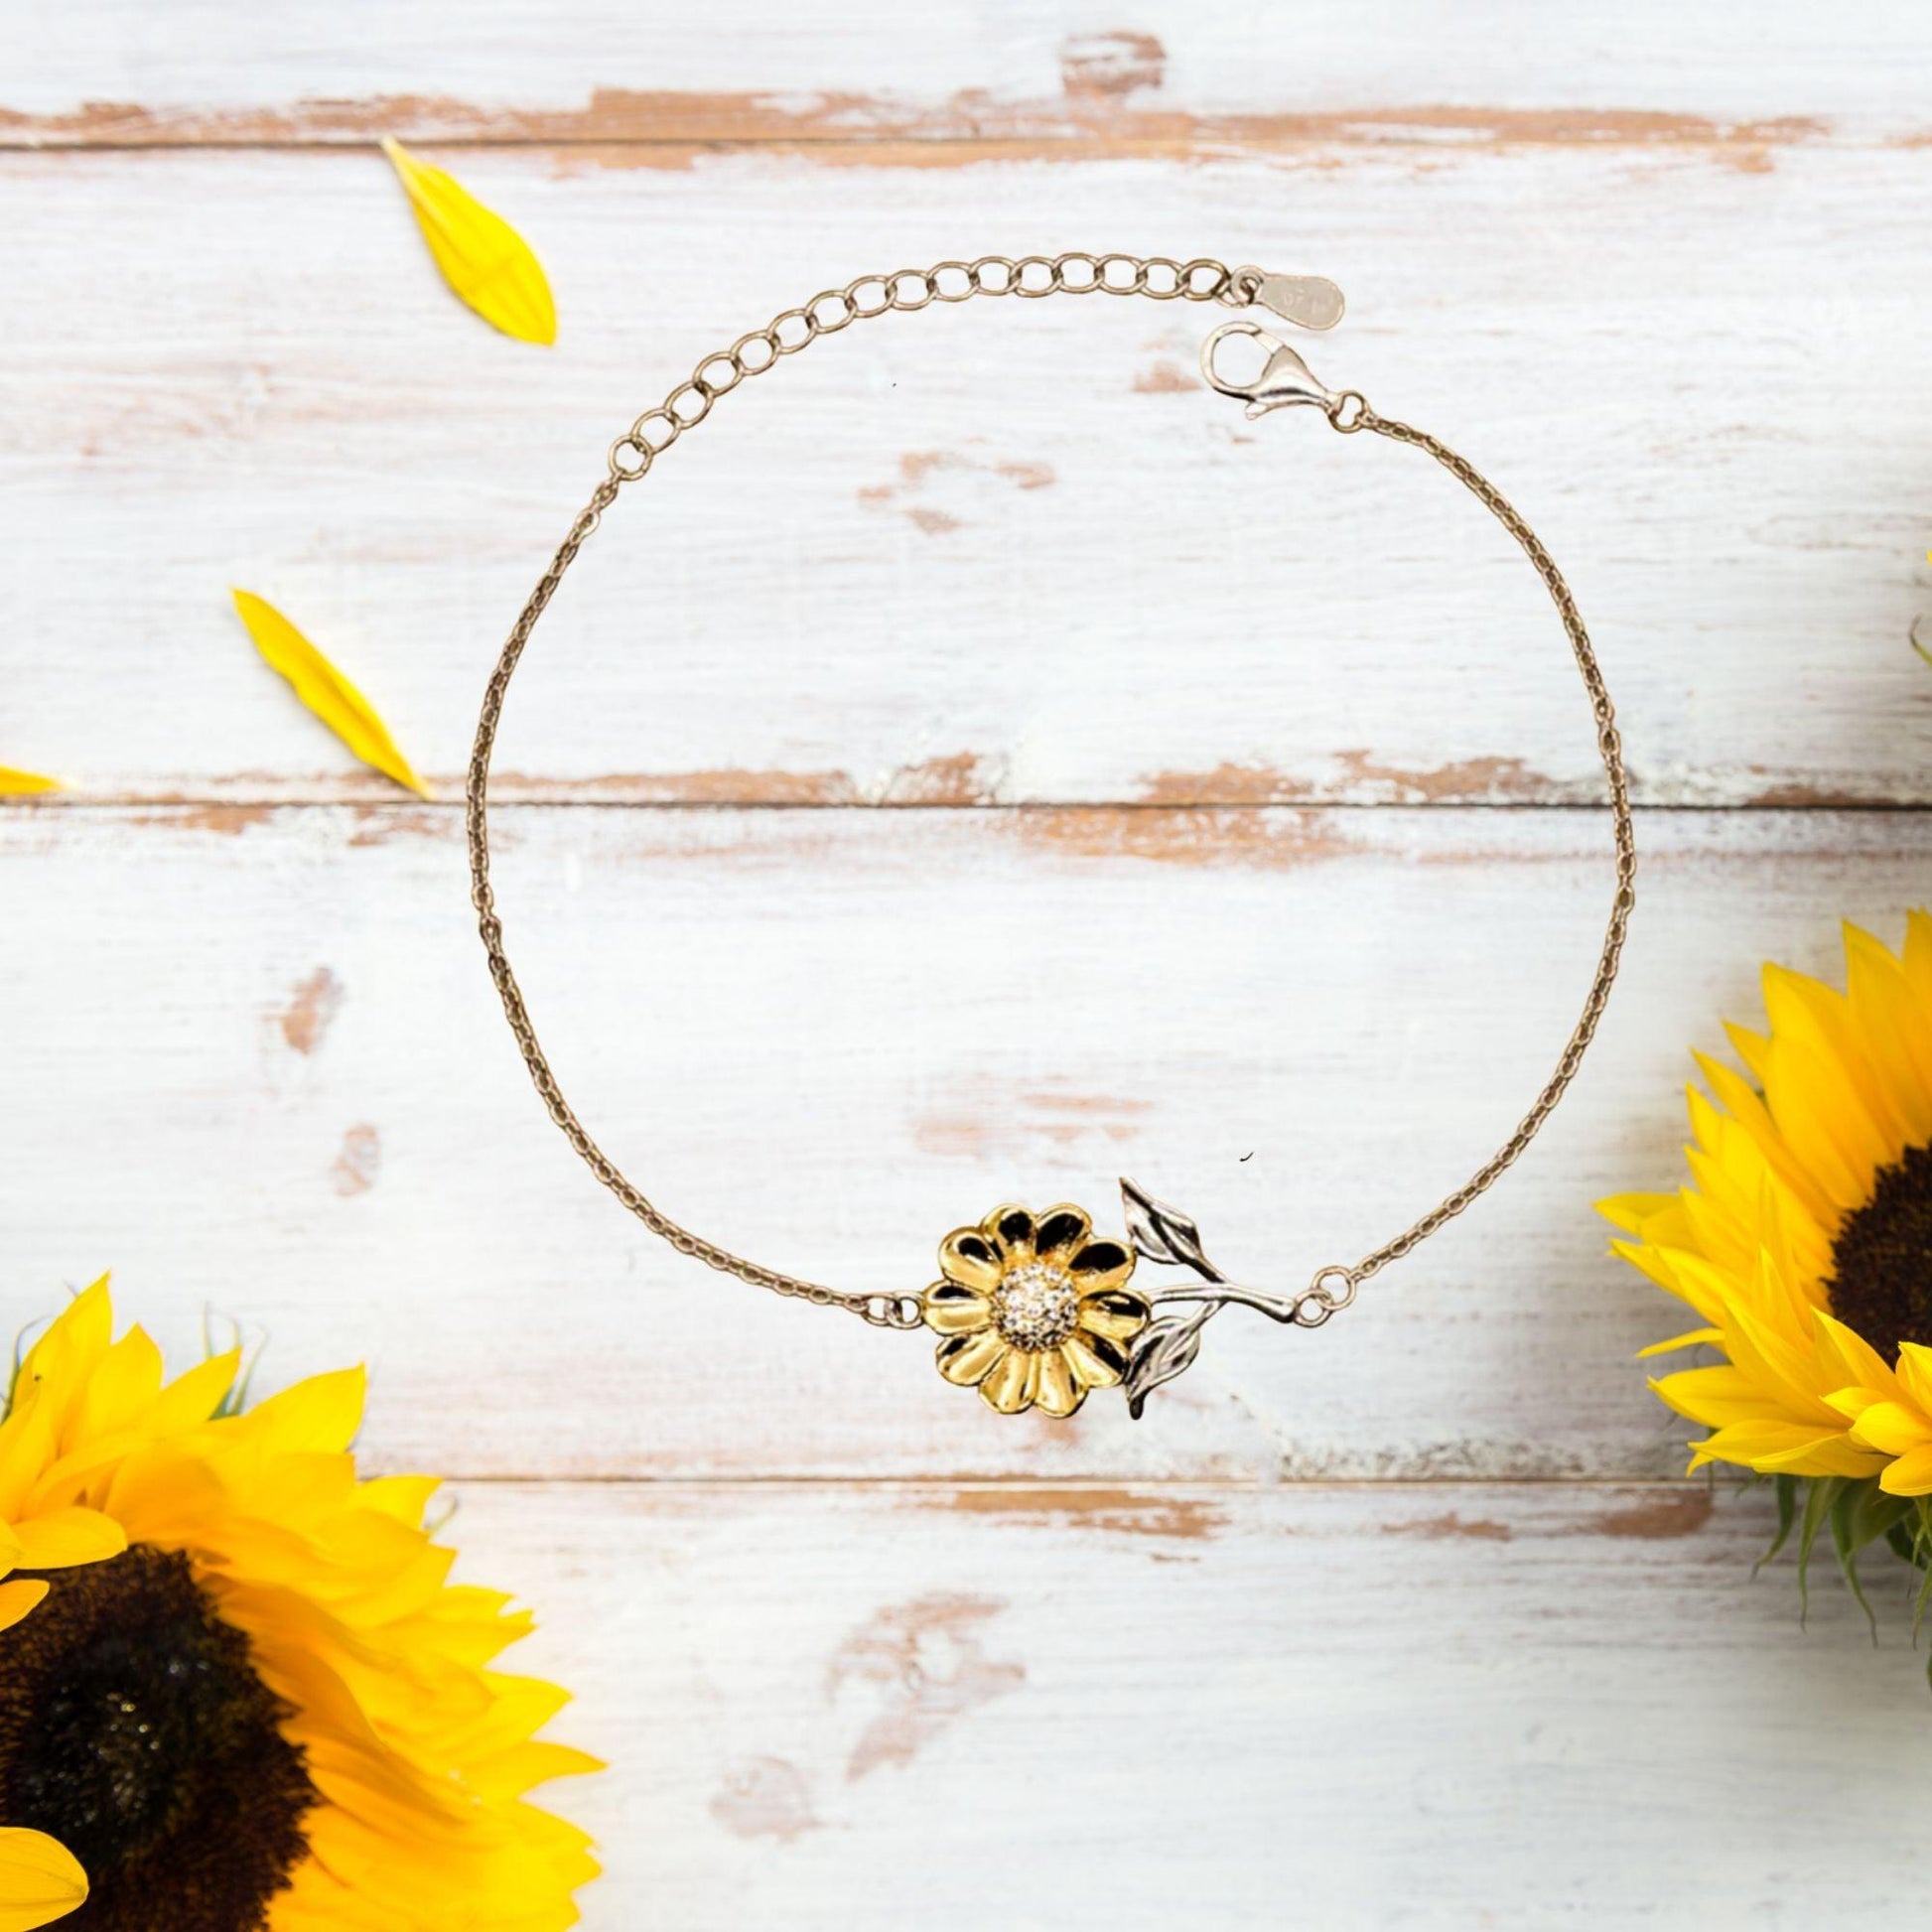 Motivational Stepdad Sunflower Bracelet, Stepdad I can promise to love you for the rest of mine, Bracelet with Message Card For Stepdad, Stepdad Birthday Jewelry Gift for Women Men - Mallard Moon Gift Shop